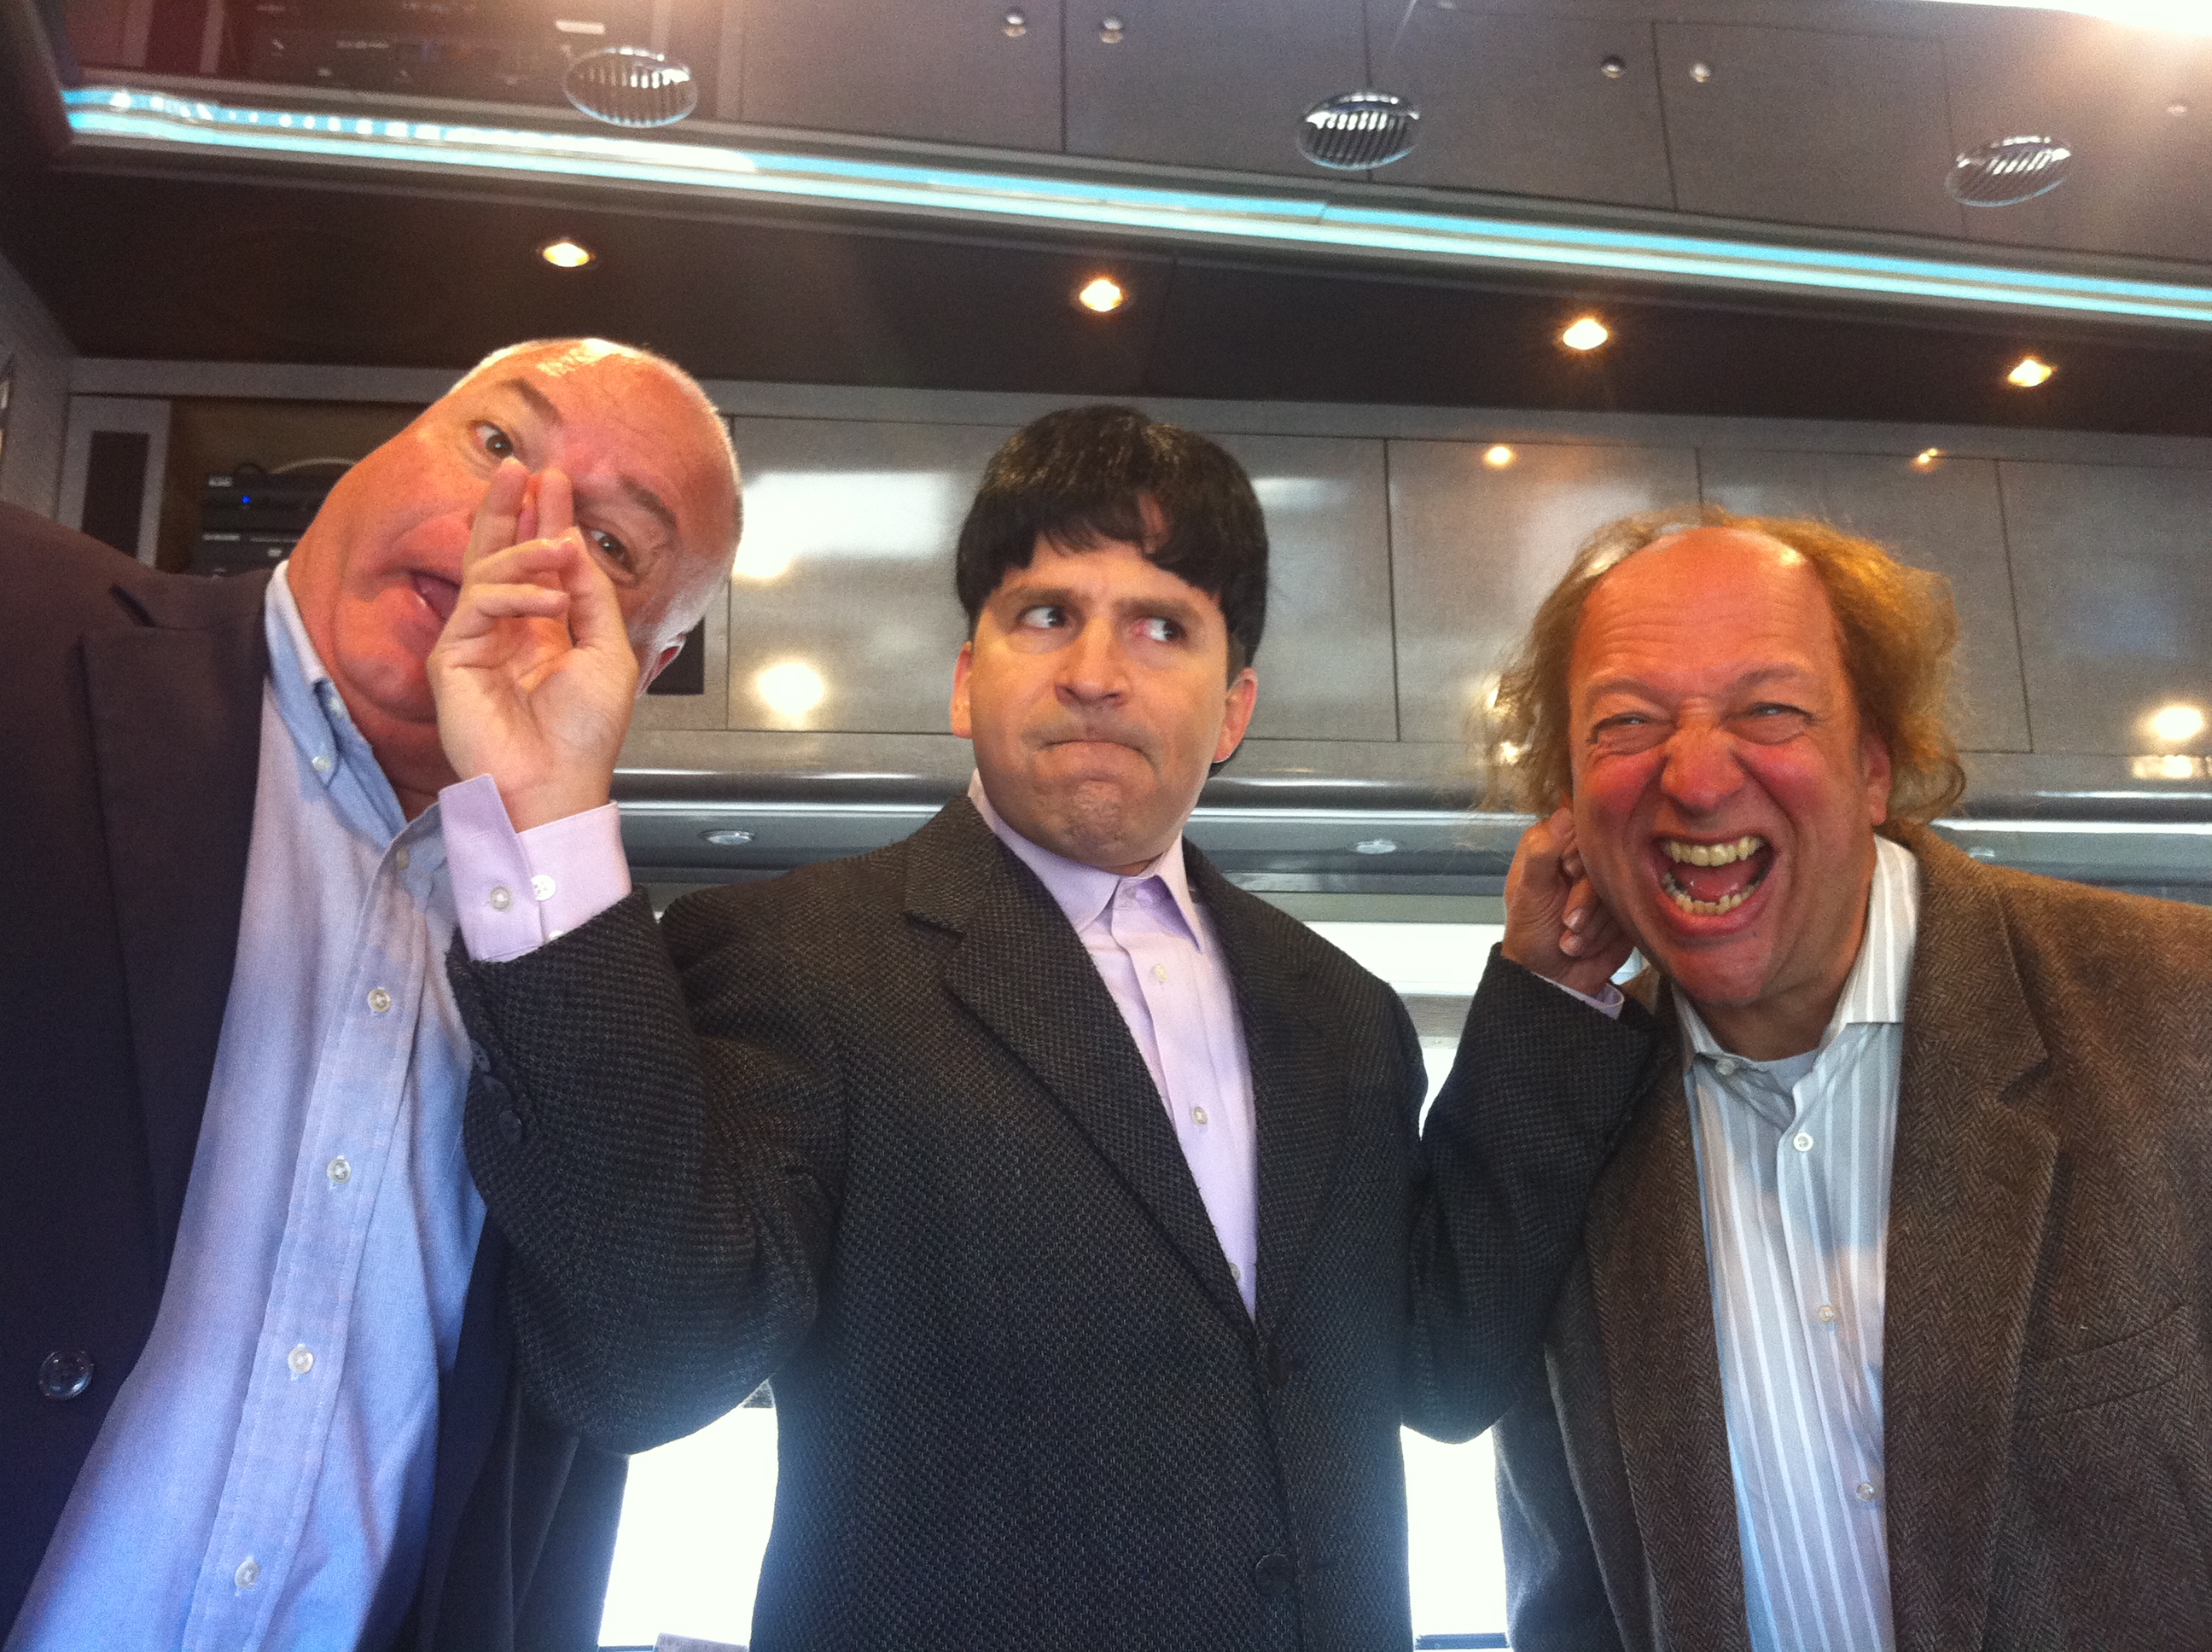 as Moe along with sidekicks Larry & Curly promoting the new Three Stooges Movie.